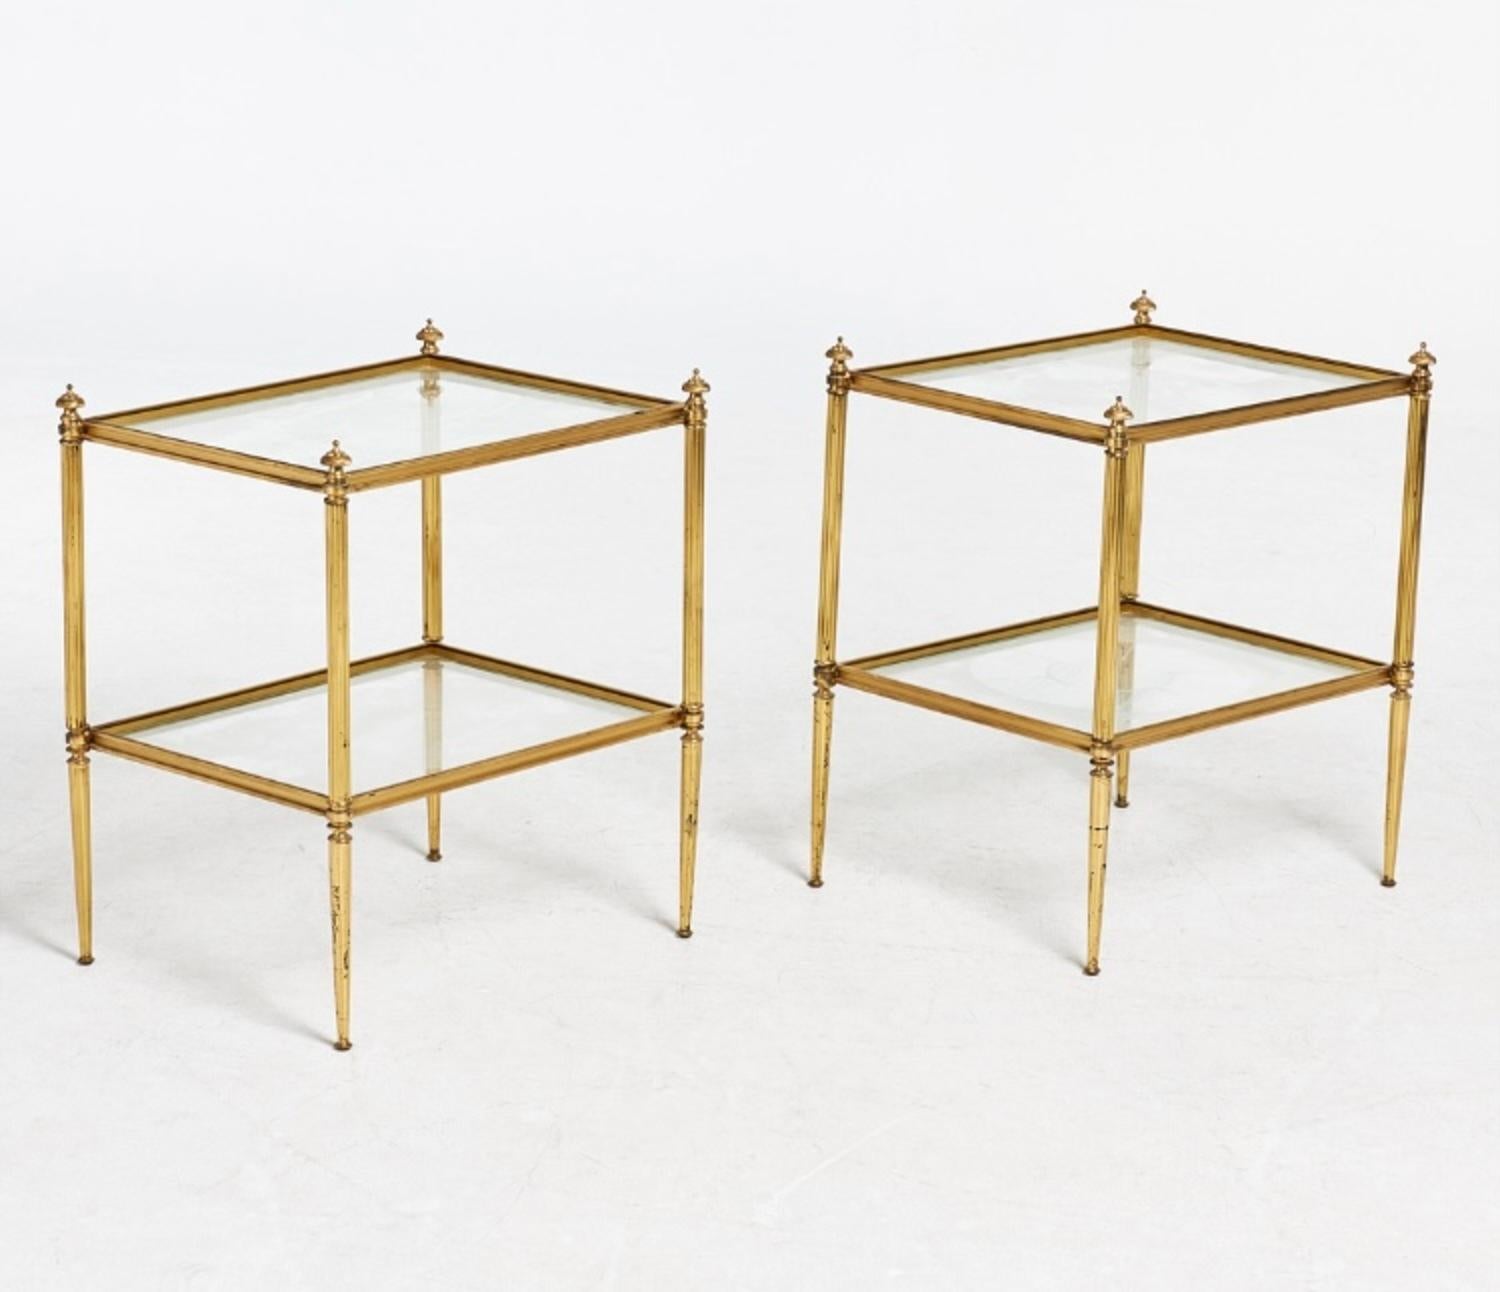 A pair of French Maison Jansen-style tables based on the Louis Xvi model, in gilded brass and two trays with glass tops are very decorative tables with various uses, in Good condition.